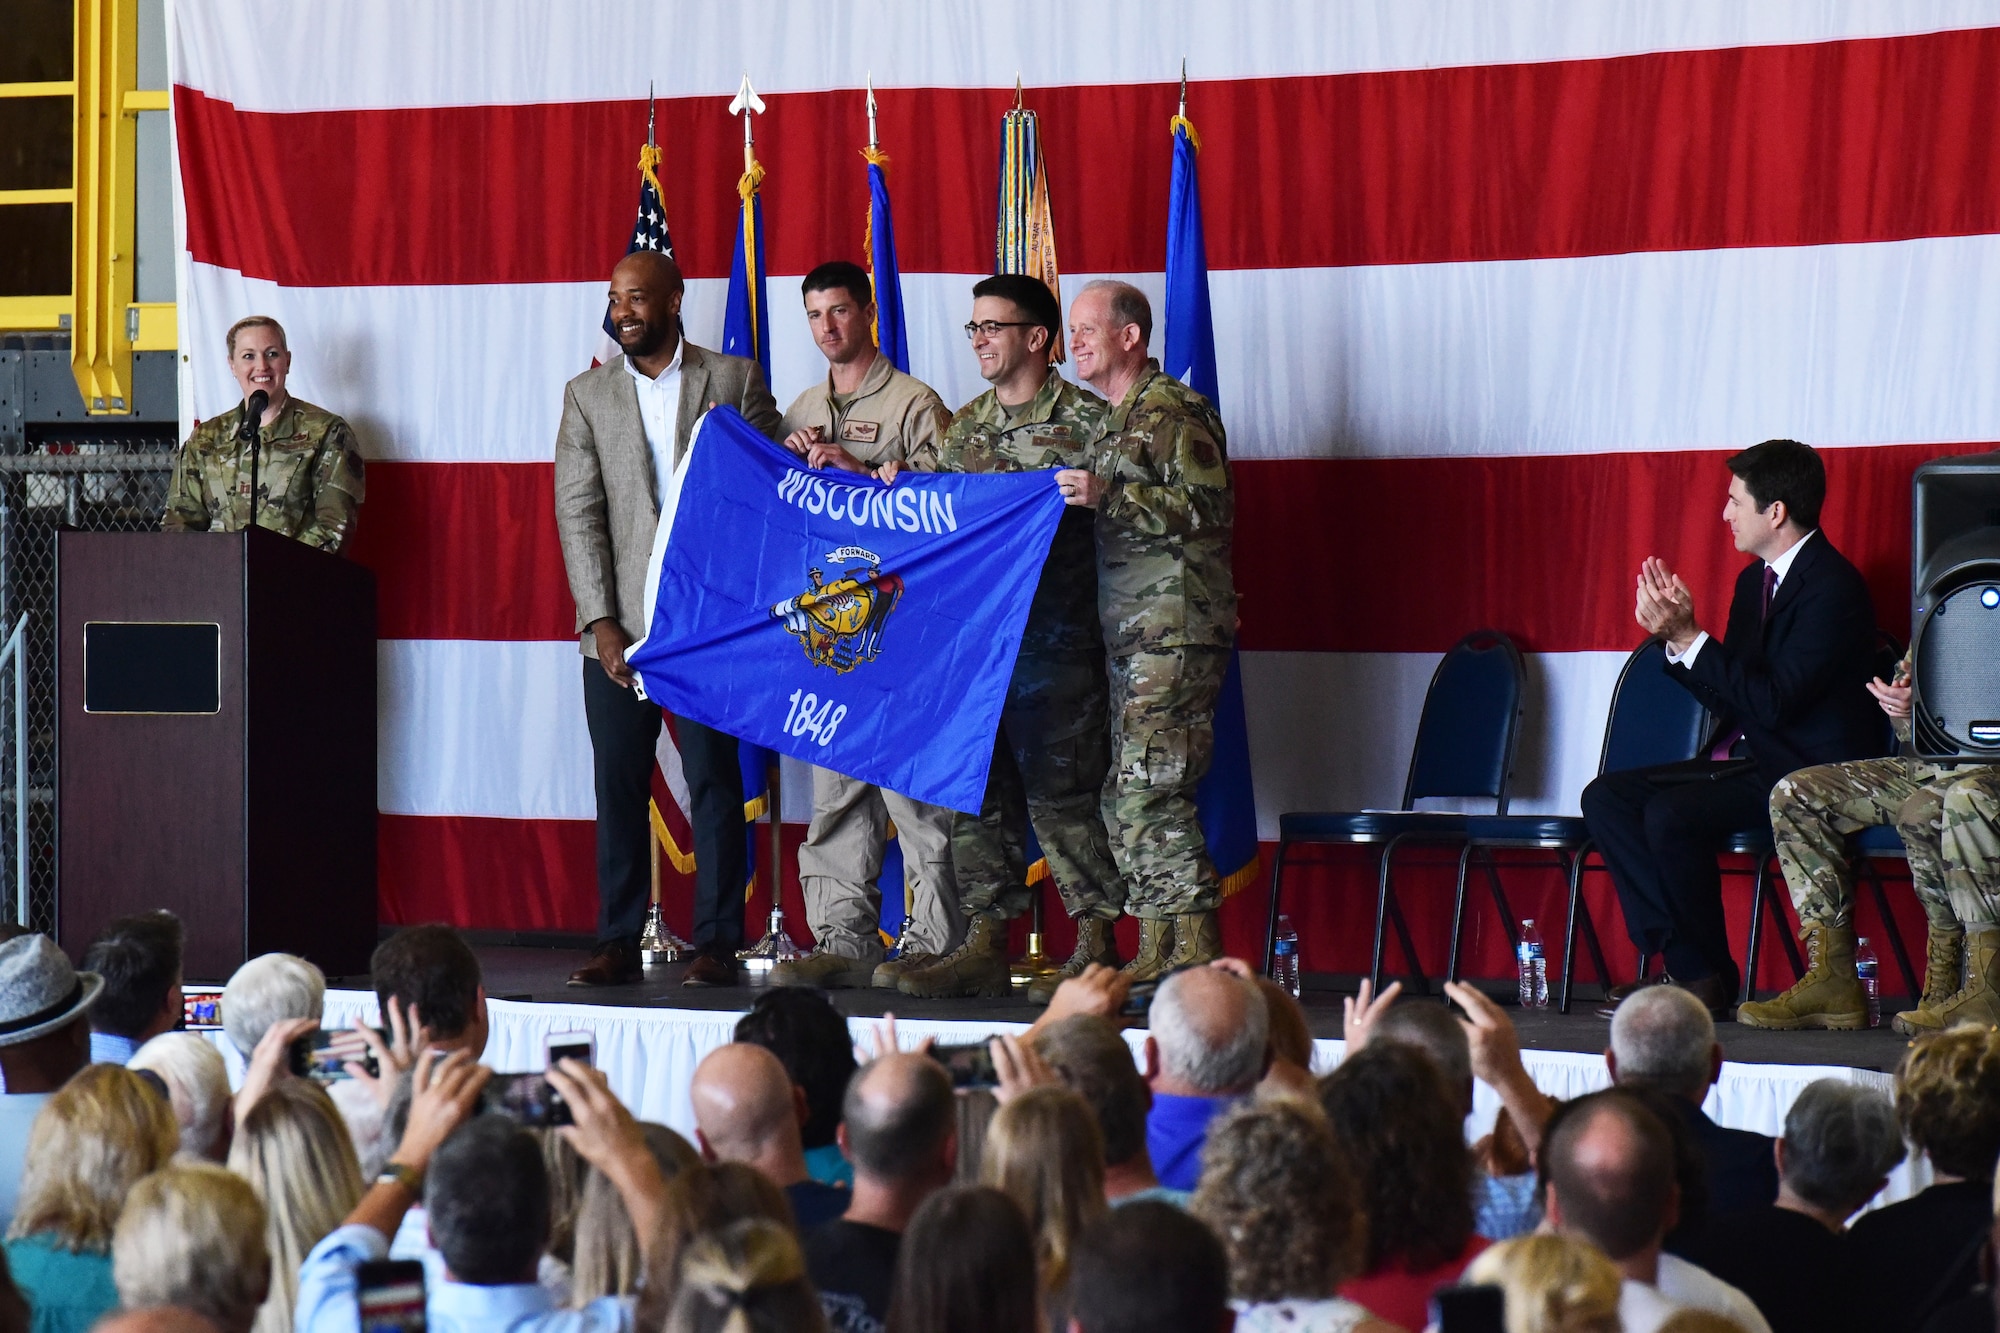 Wisconsin Lt. Gov. Mandela Barnes and U.S. Air Force Maj. Gen. Donald Dunbar, the adjutant general of Wisconsin, present the Wisconsin flag to Lt. Col. Tim Dyer and Maj. Scott Paeth, both deploying Airmen of the 115th Fighter Wing, at a send off ceremony held at Truax Field, Madison, Wis. on July 21, 2019.  The 115th Fighter Wing deployed approximately 300 personnel and a number of aircraft to Afghanistan in support of Operation Freedom Sentinel and NATO's Resolute Support. (U.S. Air National Guard photo by Staff Sgt. Kyle Russell)